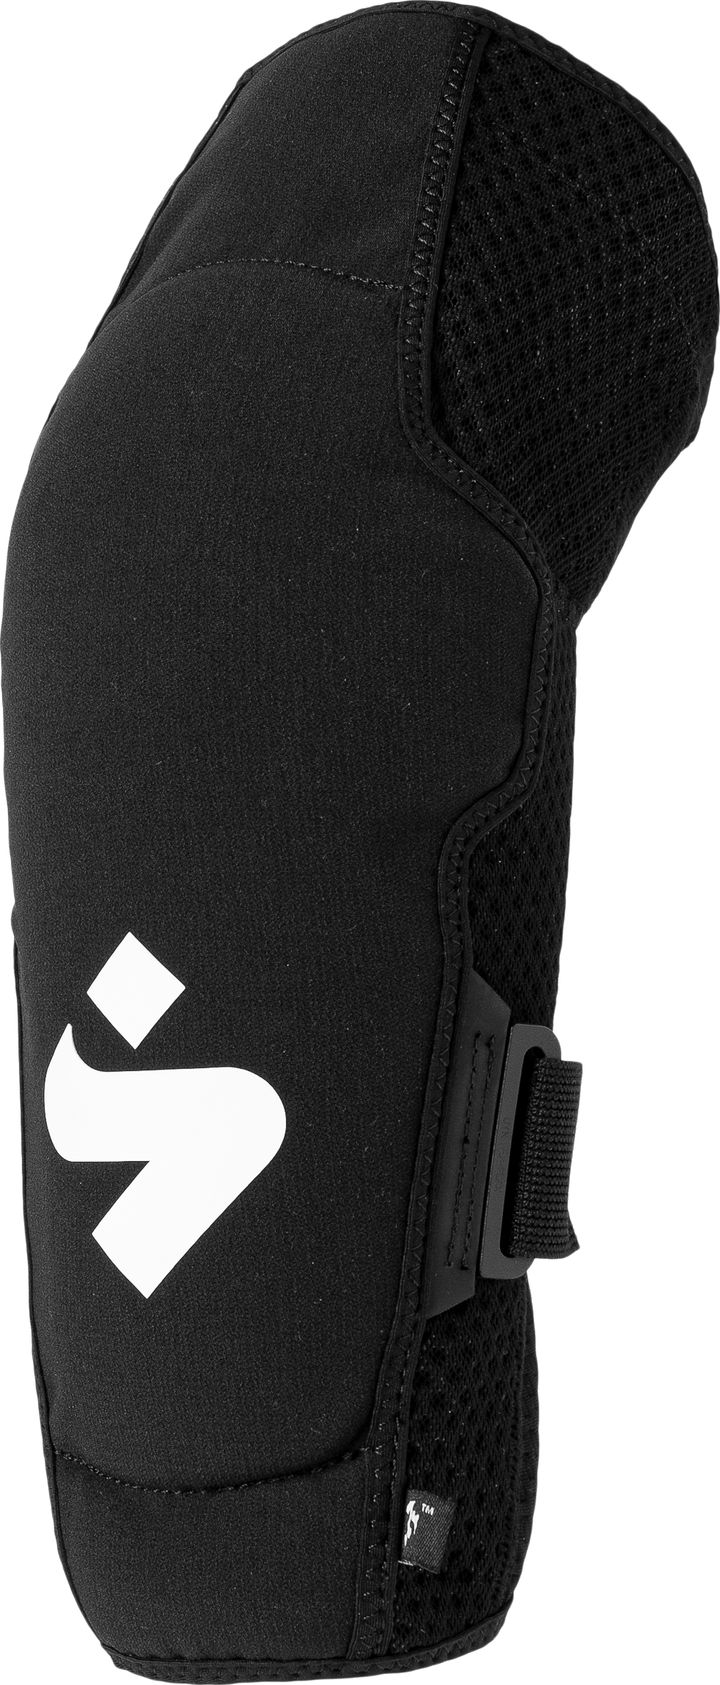 Sweet Protection Knee Guards Pro Black Sweet Protection